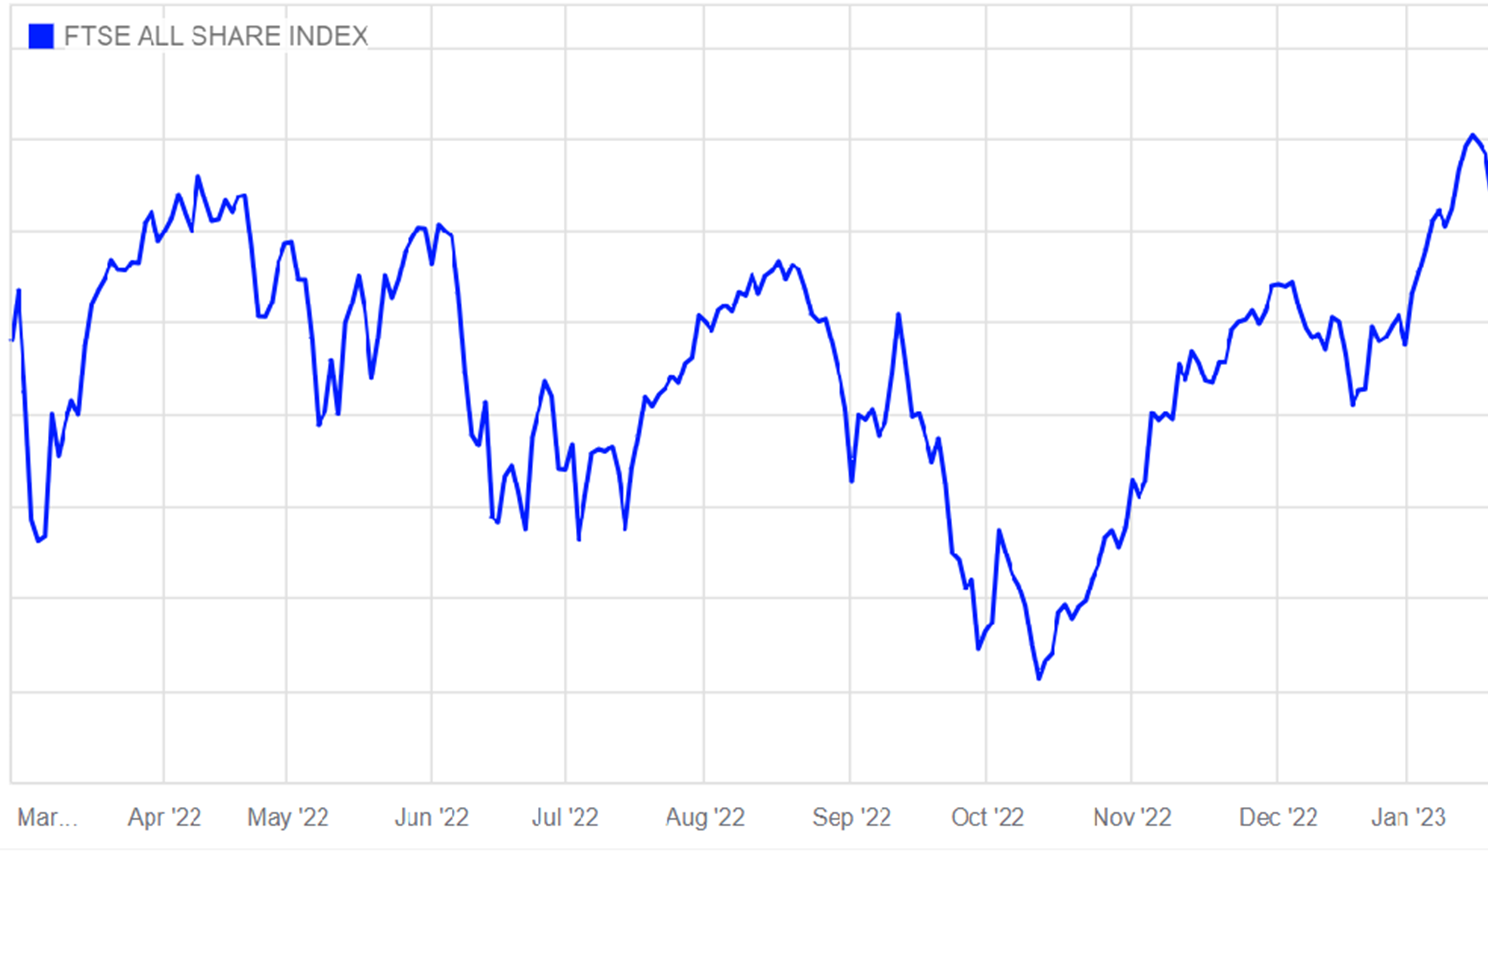 Graph showing FTSE share steadily increasing over time